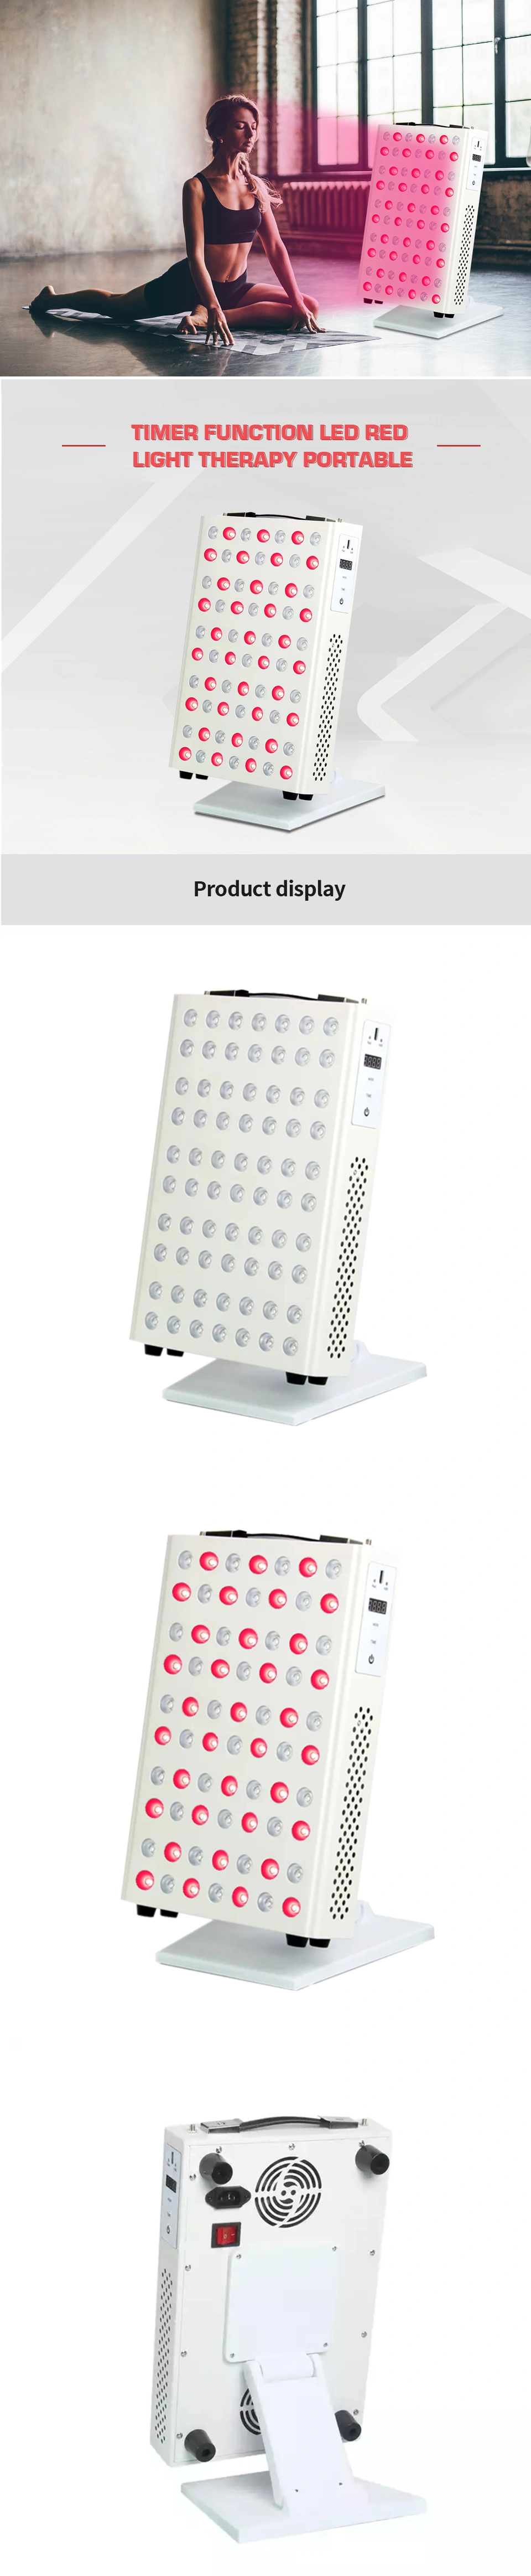 led Infrared beauty therapy light